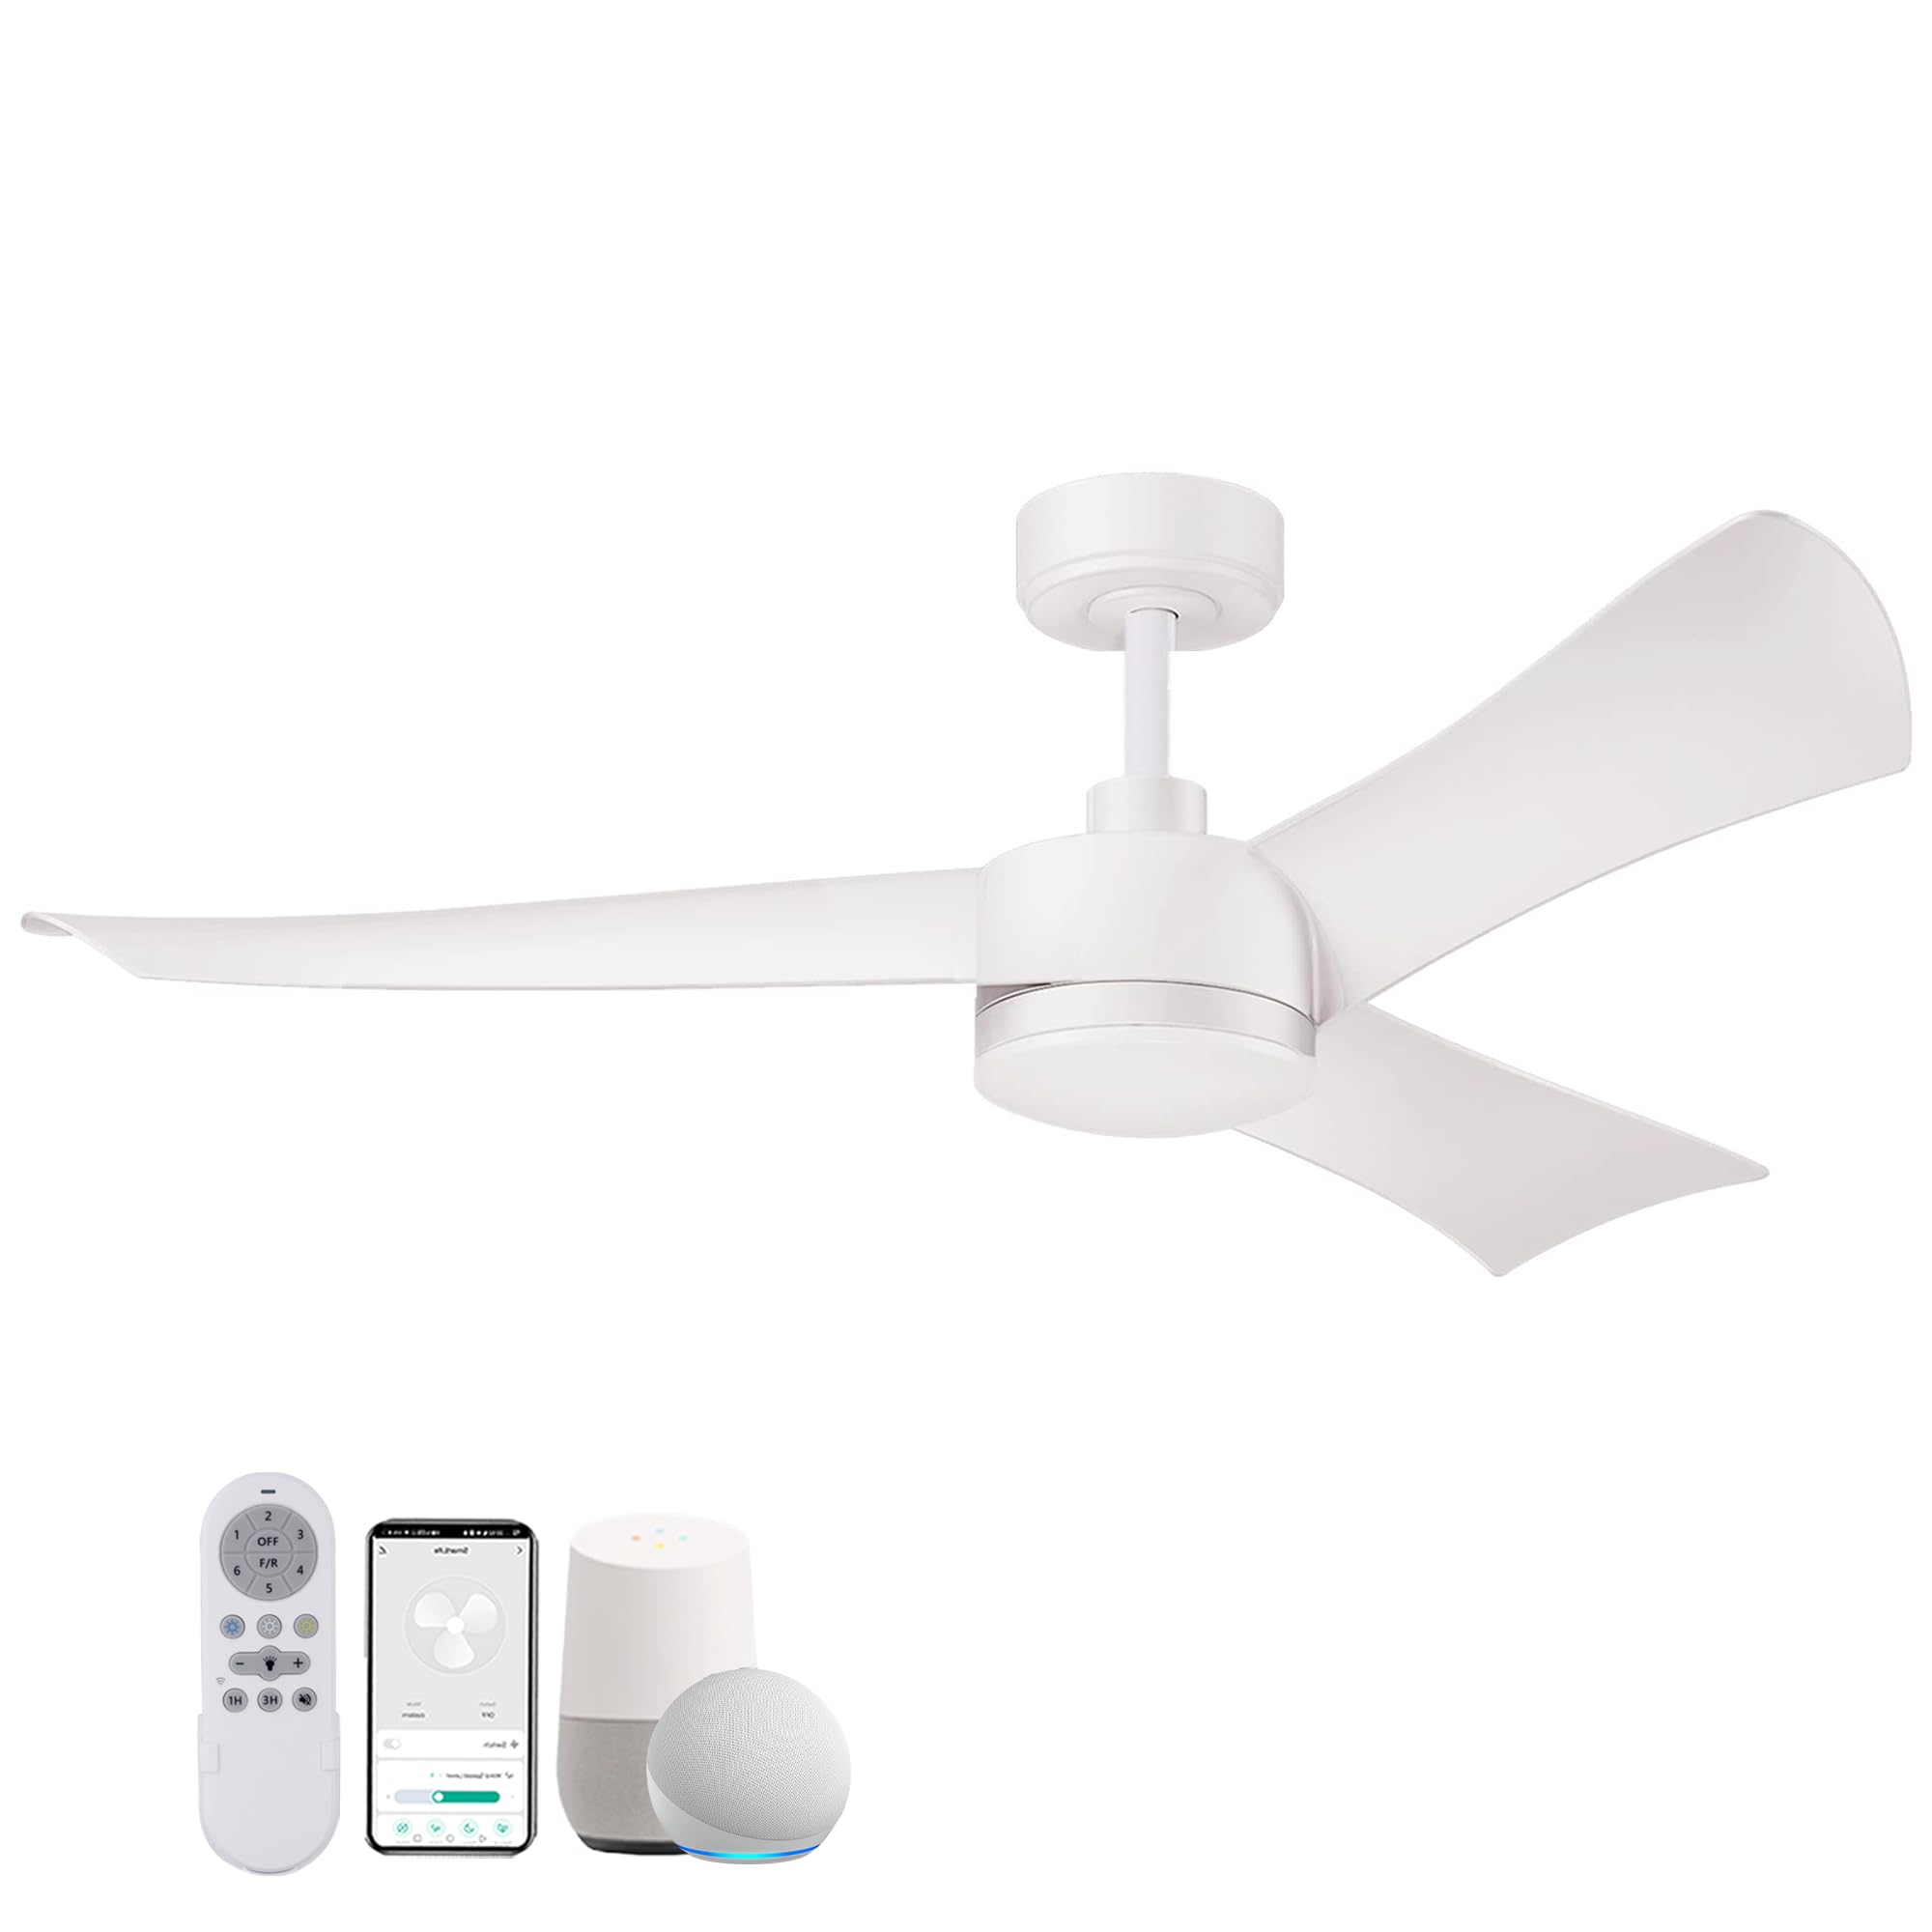 52" White Smart Ceiling Fans with Lights Remote Control,Quiet DC Motor,Outdoor Indoor Ceiling Fan,High CFM 6-Speed,WIFI Alexa APP workable,Dimmable LED light,Modern 3 Blades for Bedroom Patios Porch